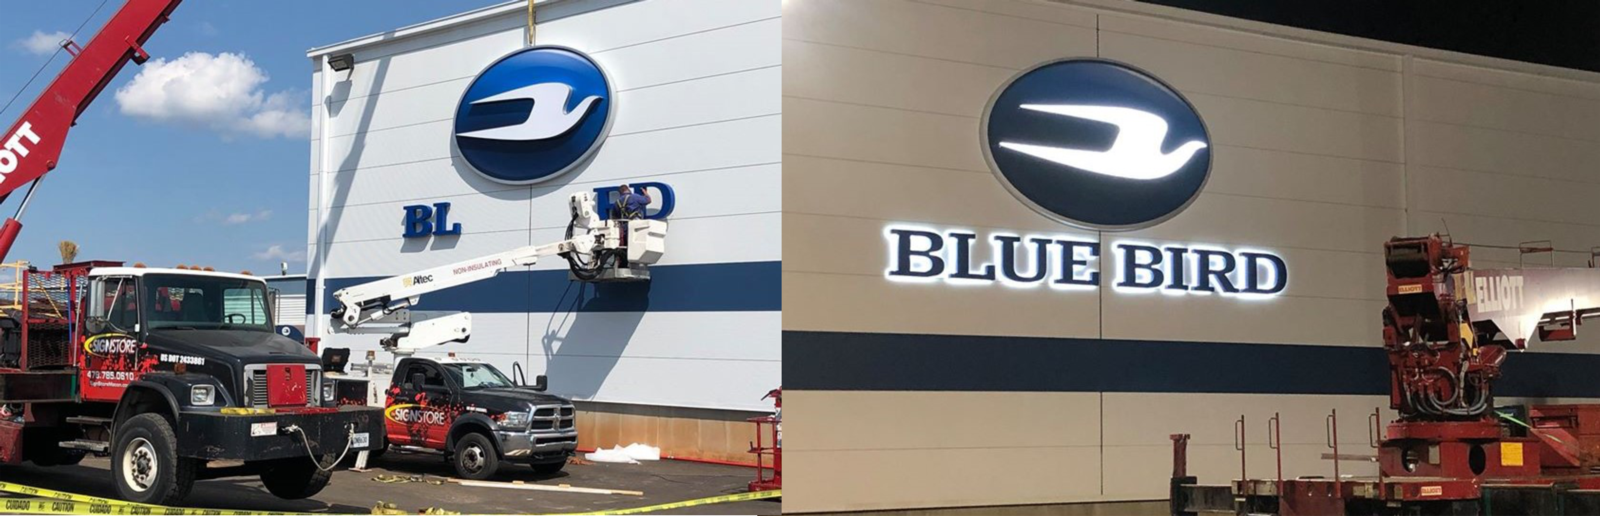 The Sign Stores Fleet of Cranes and trucks install the lighted blue bird sign to the building